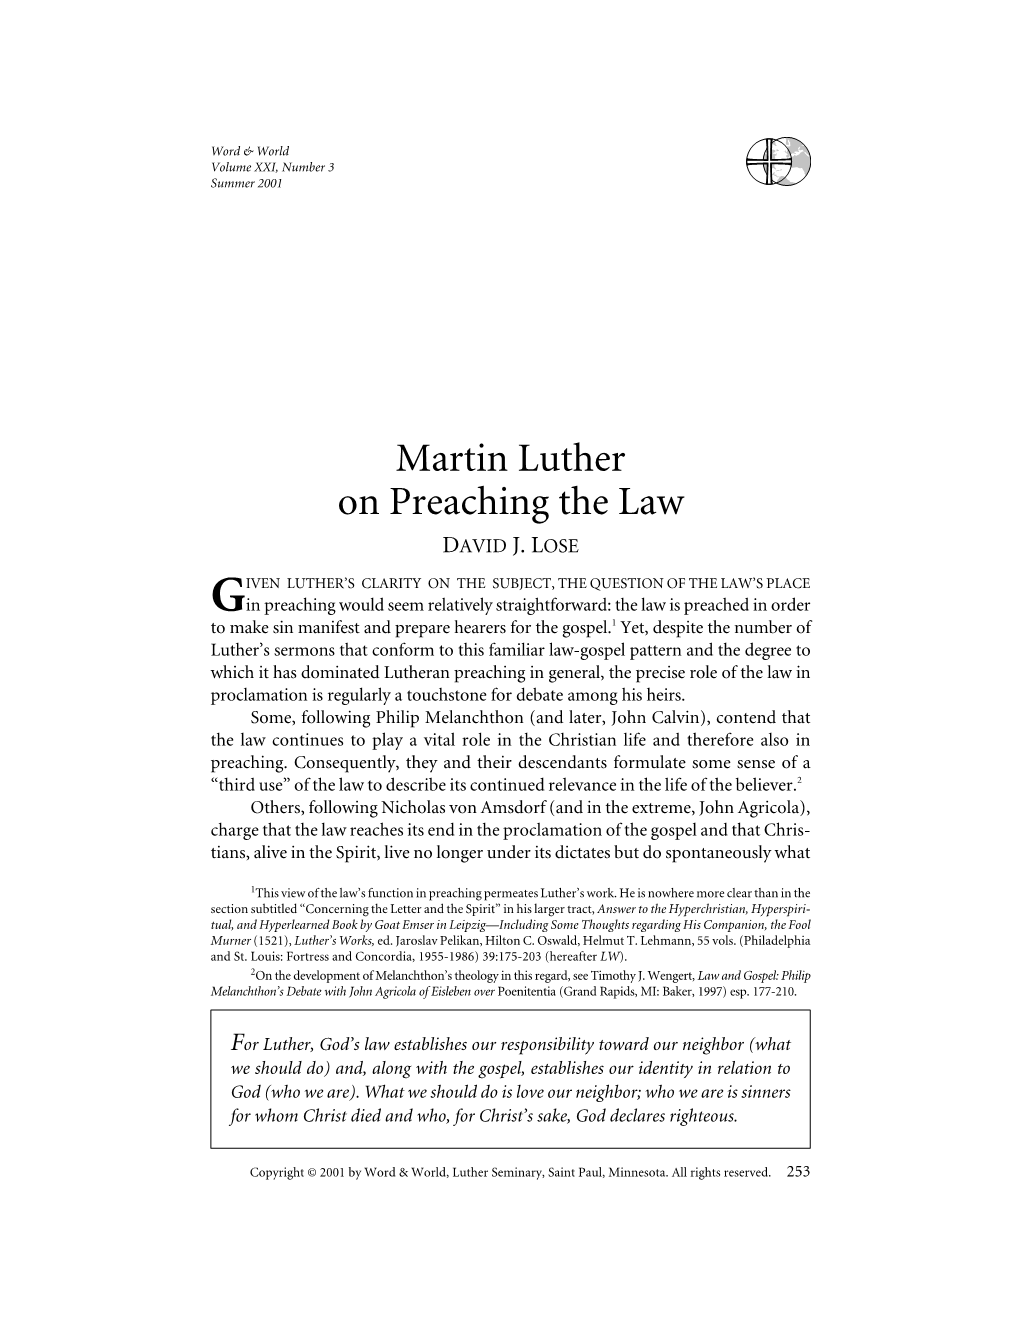 Martin Luther on Preaching the Law DAVID J